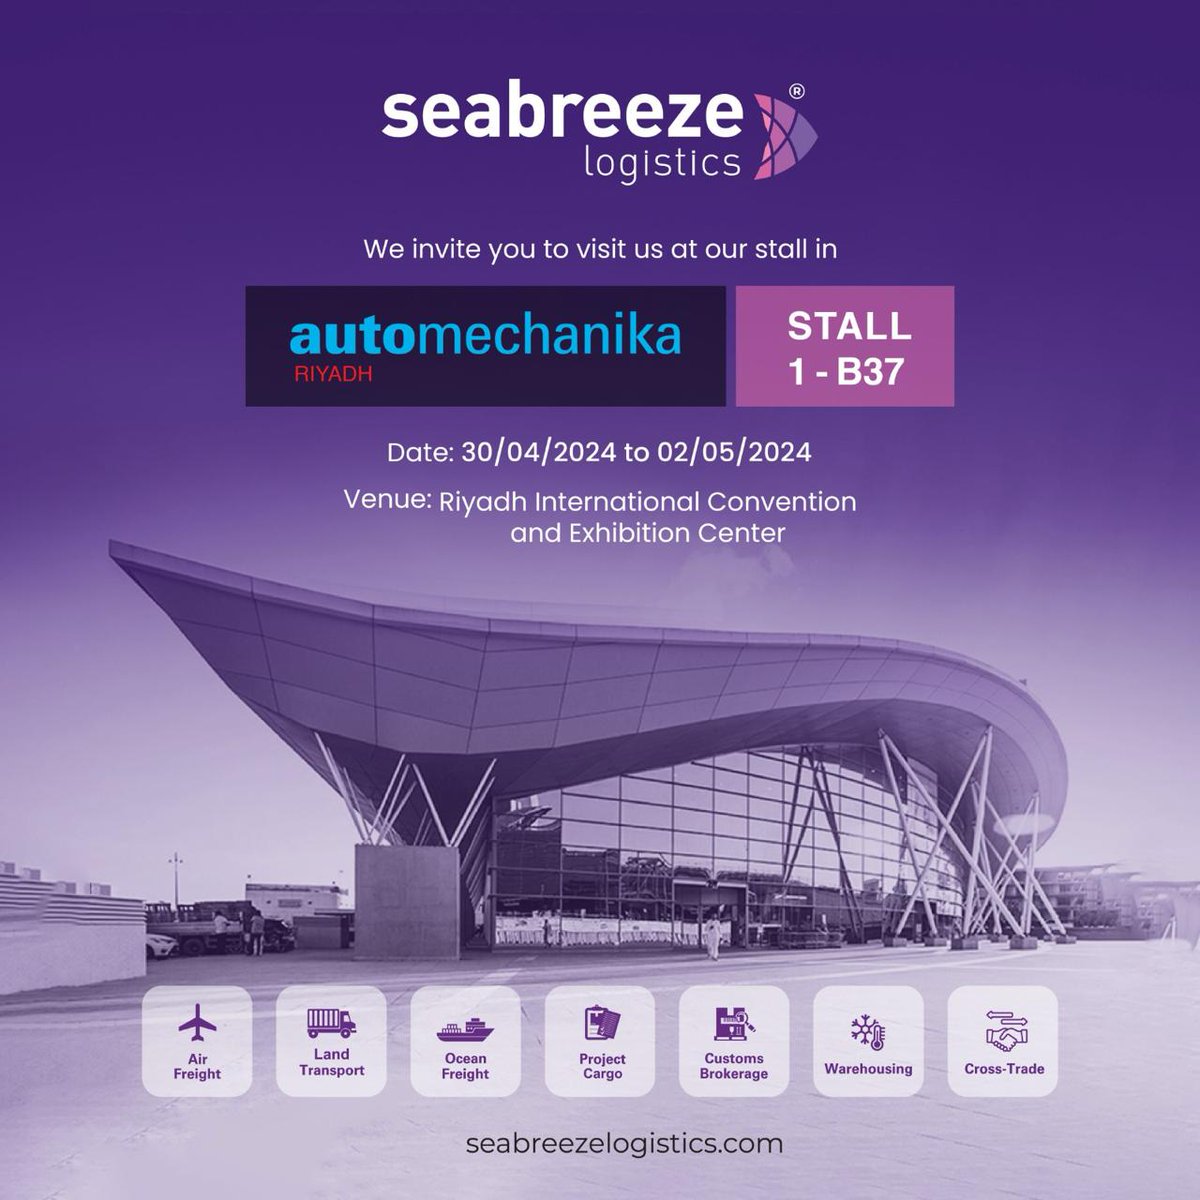 Join us at Automechanica Riyadh! Visit our stall!

#SeabreezeLogistics #GlobalSupplyPartner #AutoExpo #Innovation #VisitUs